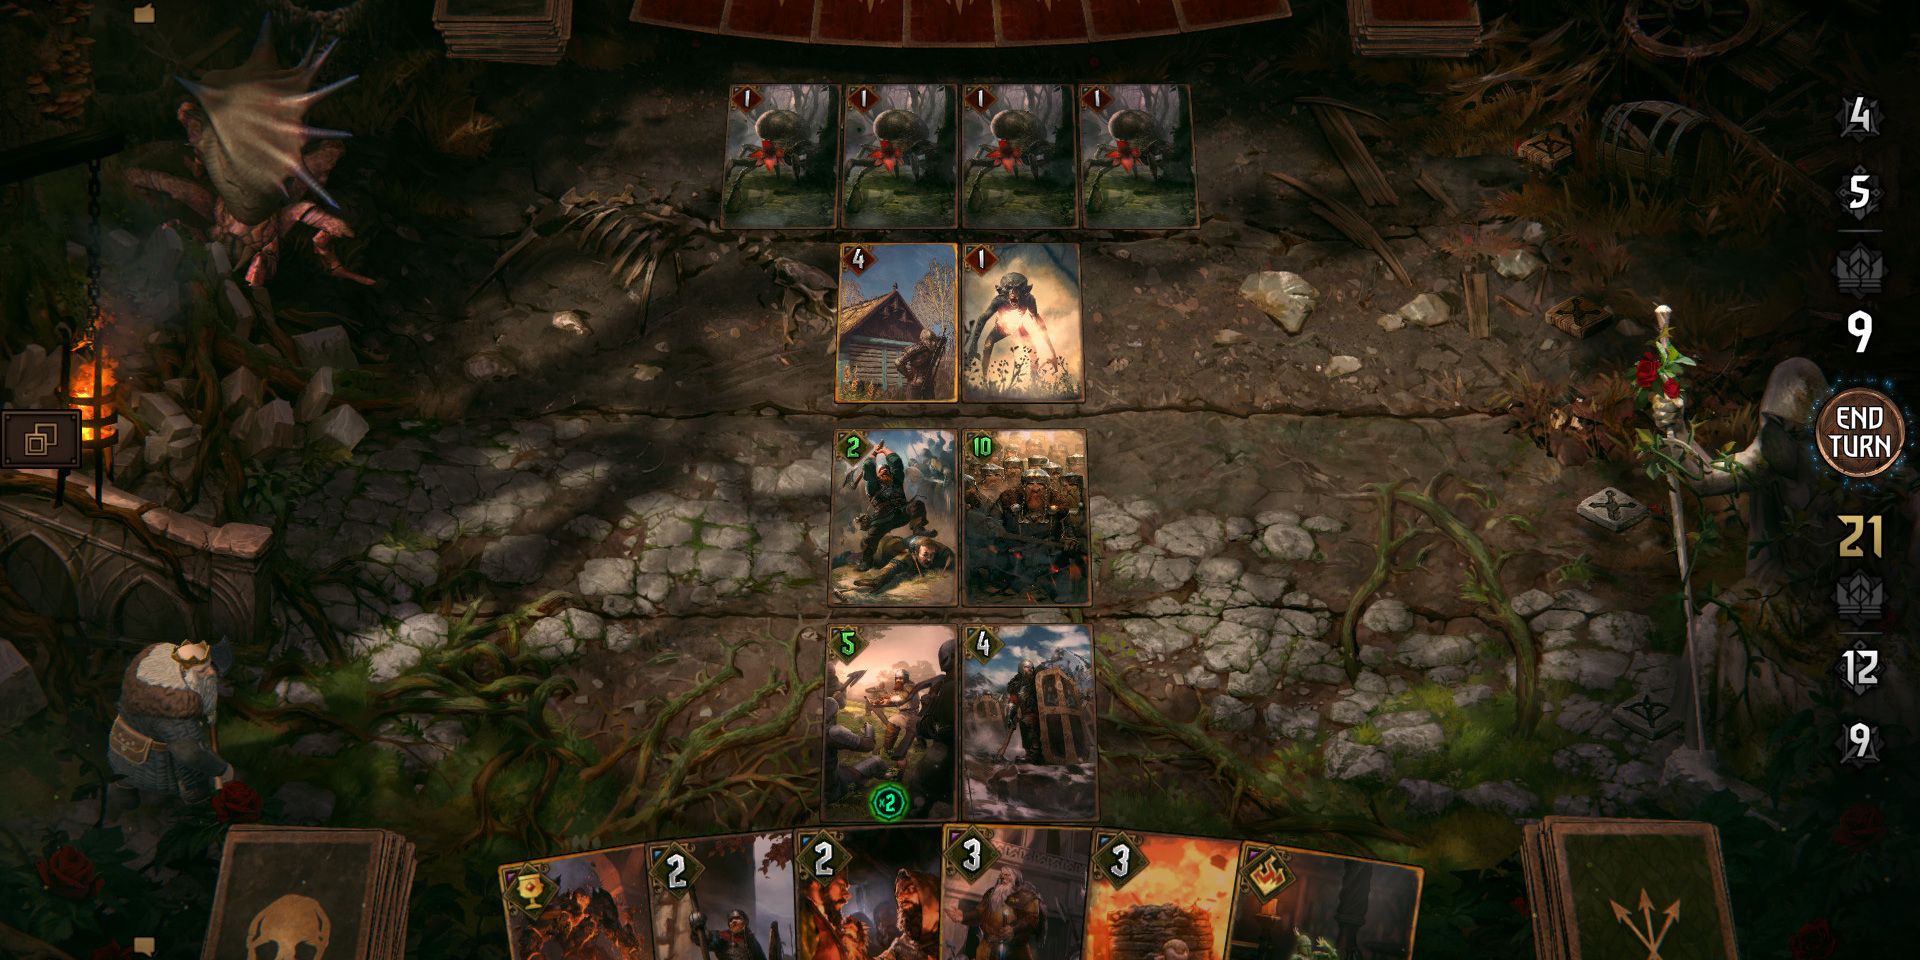 Screenshot of gameplay in Gwent from an IOS device. 